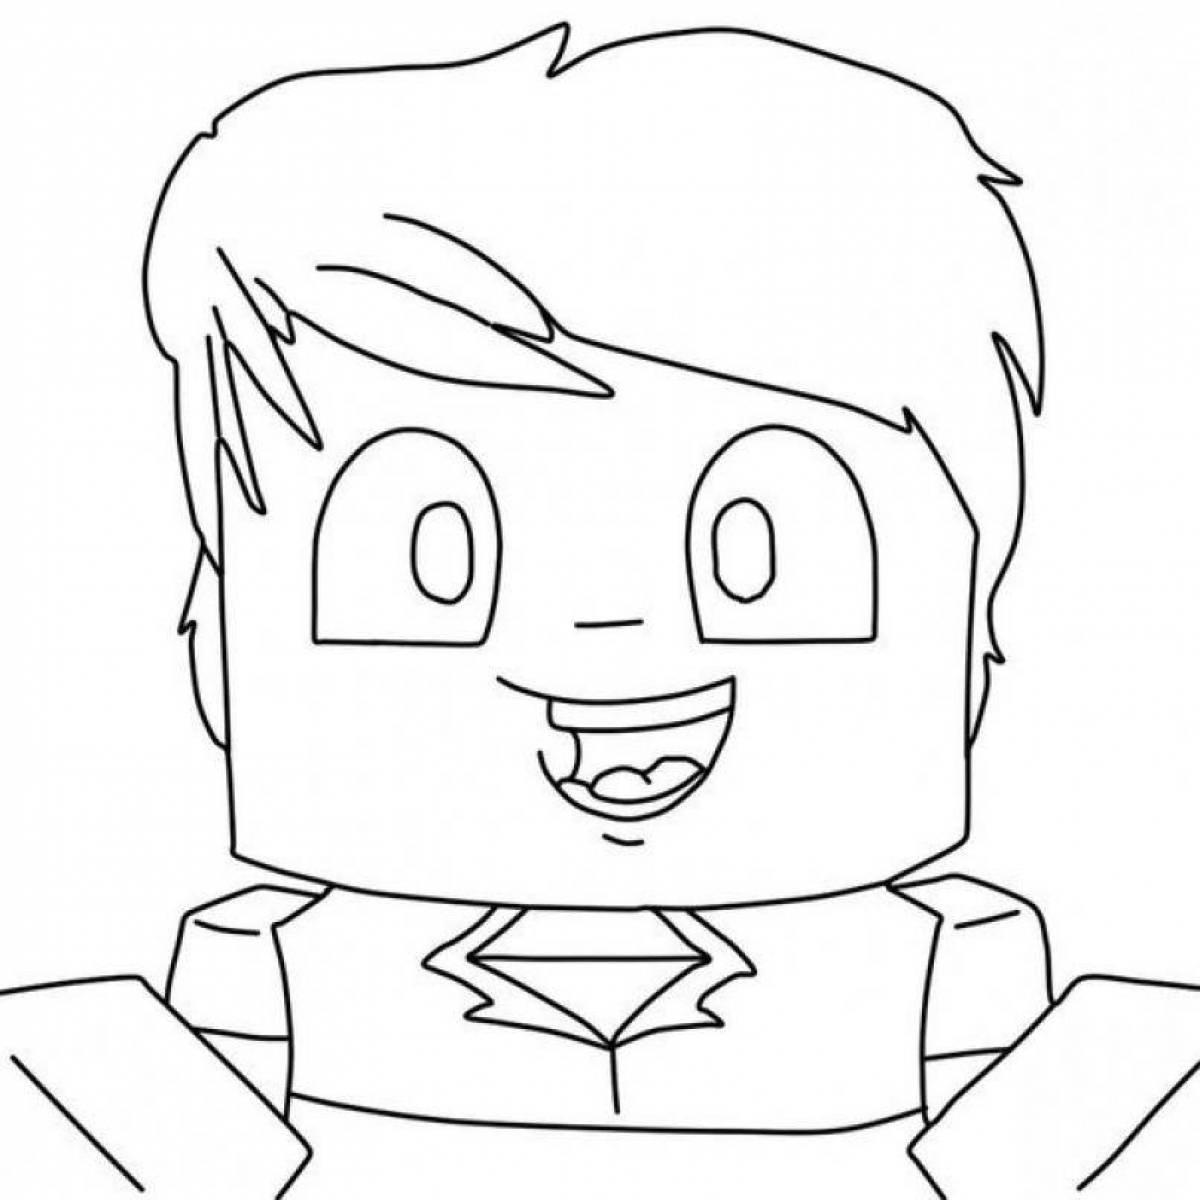 Coloring page charming vladus